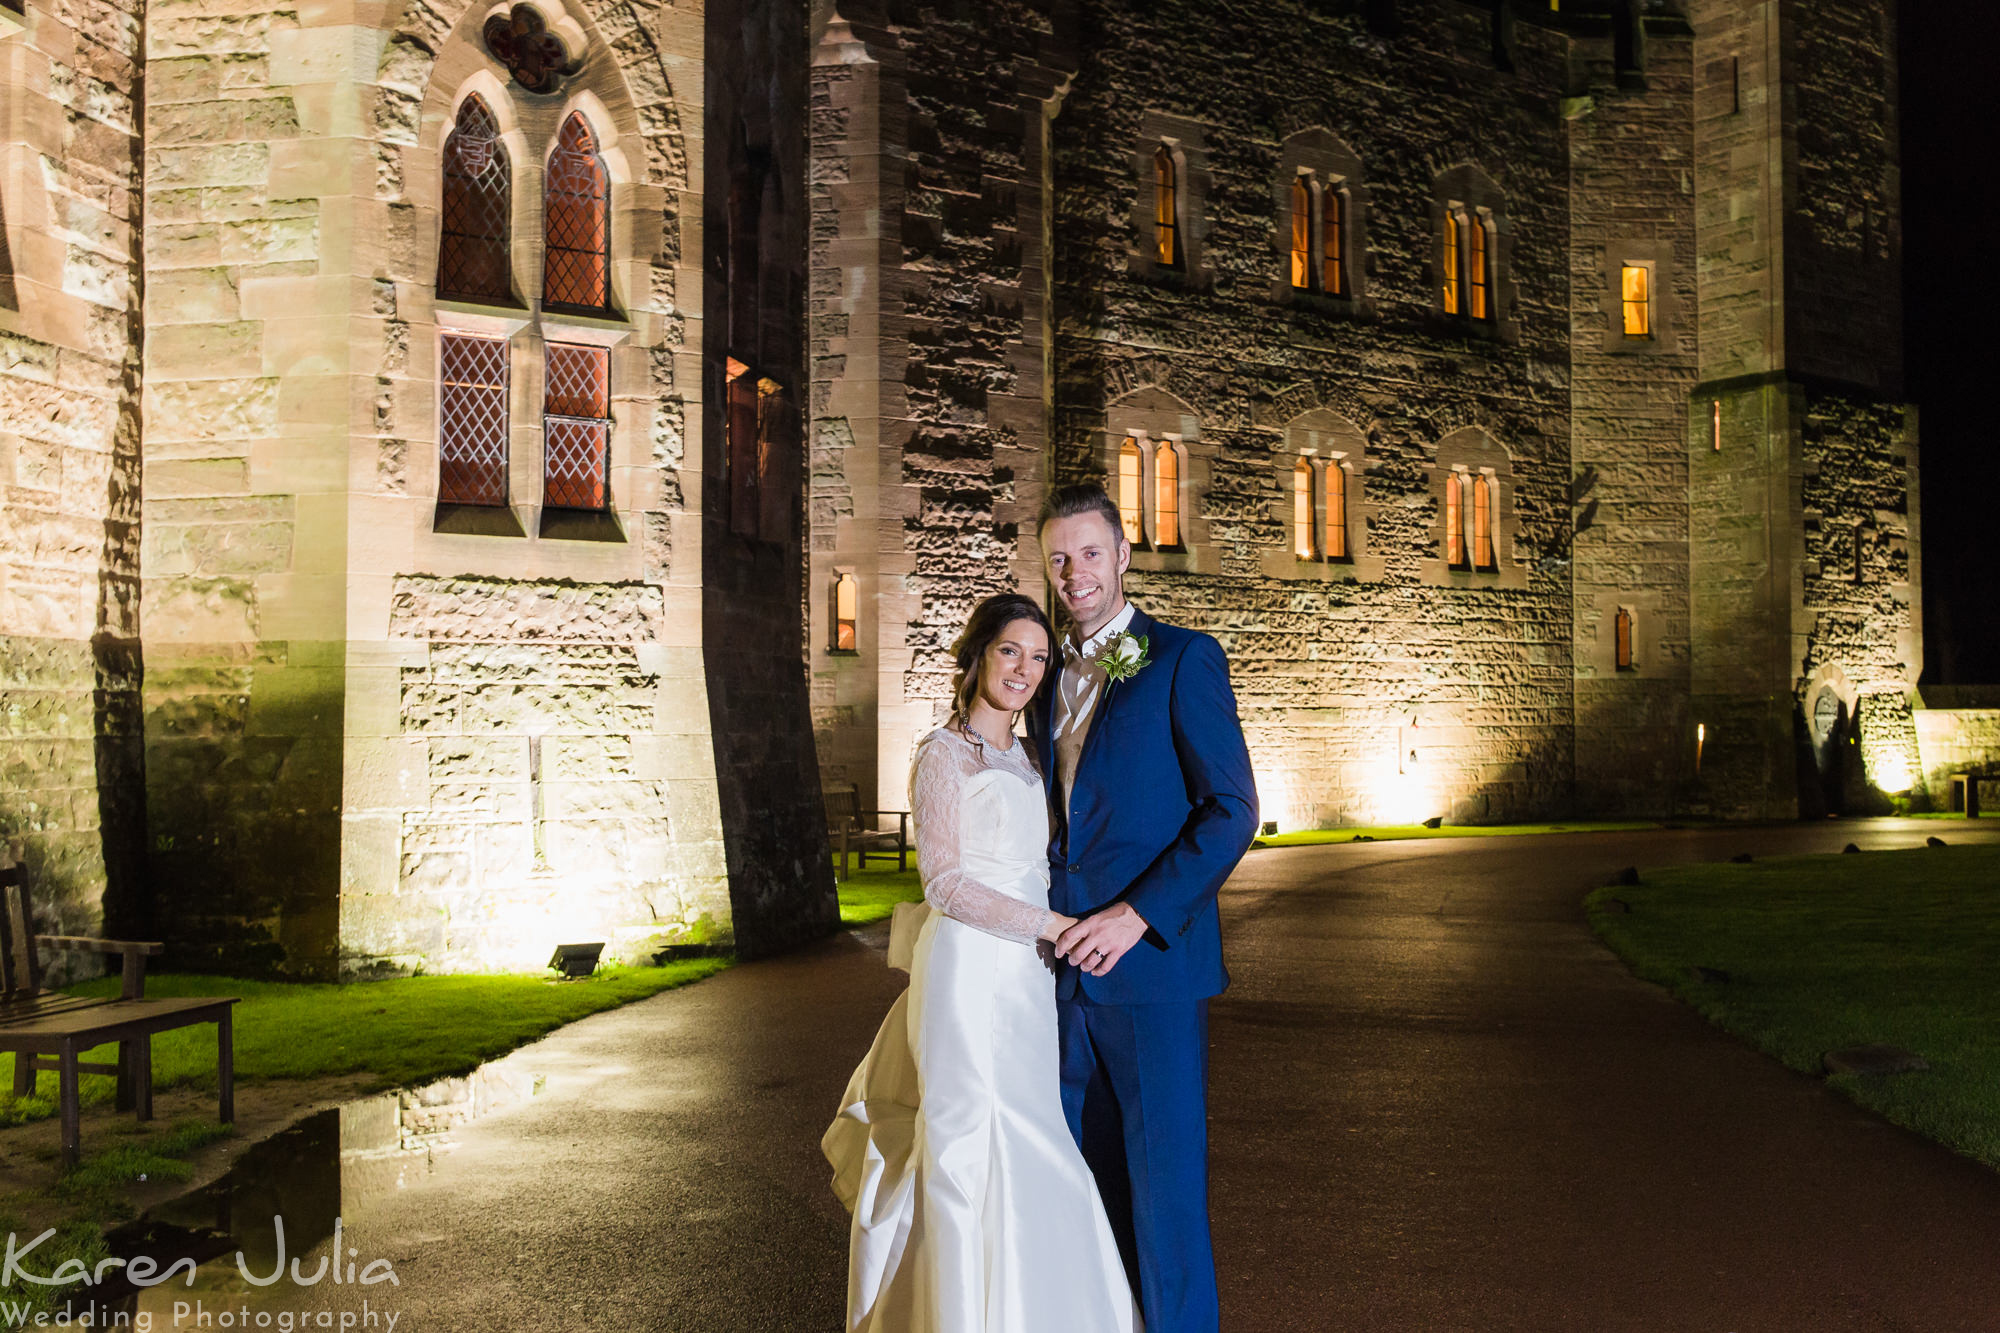 evening brie and groom portraits outside Peckforton Castle